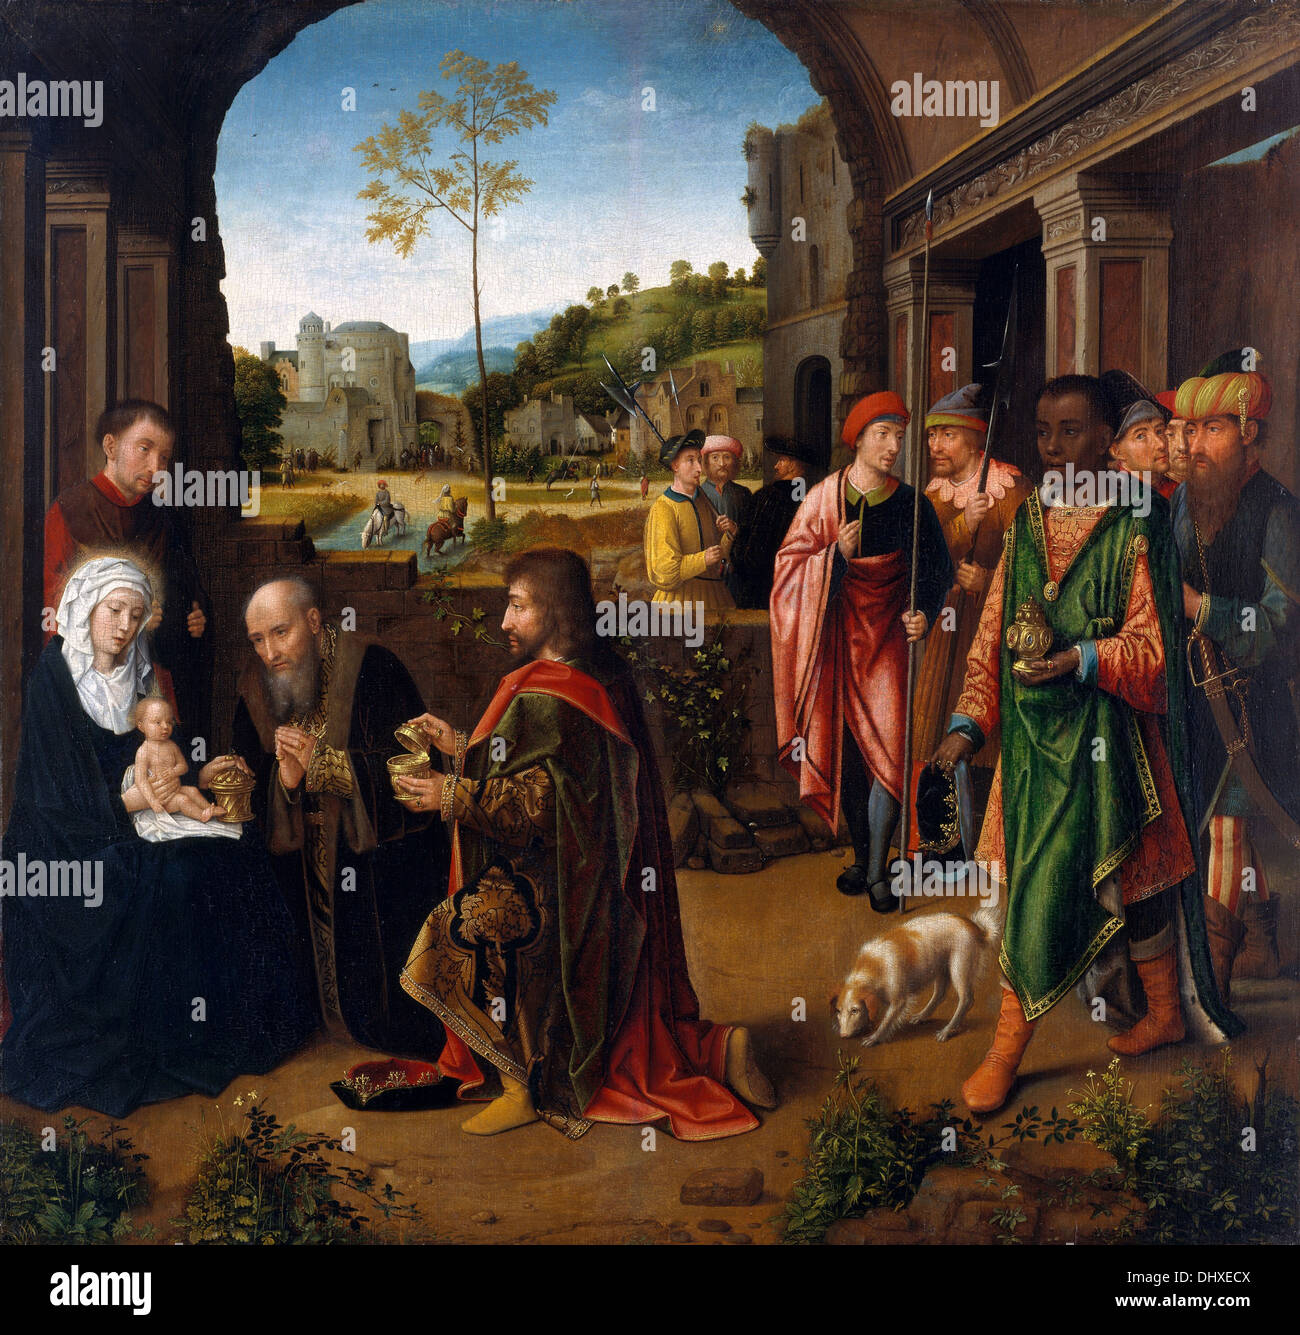 The Adoration of the Magi - by Gerard David, 1520 Stock Photo